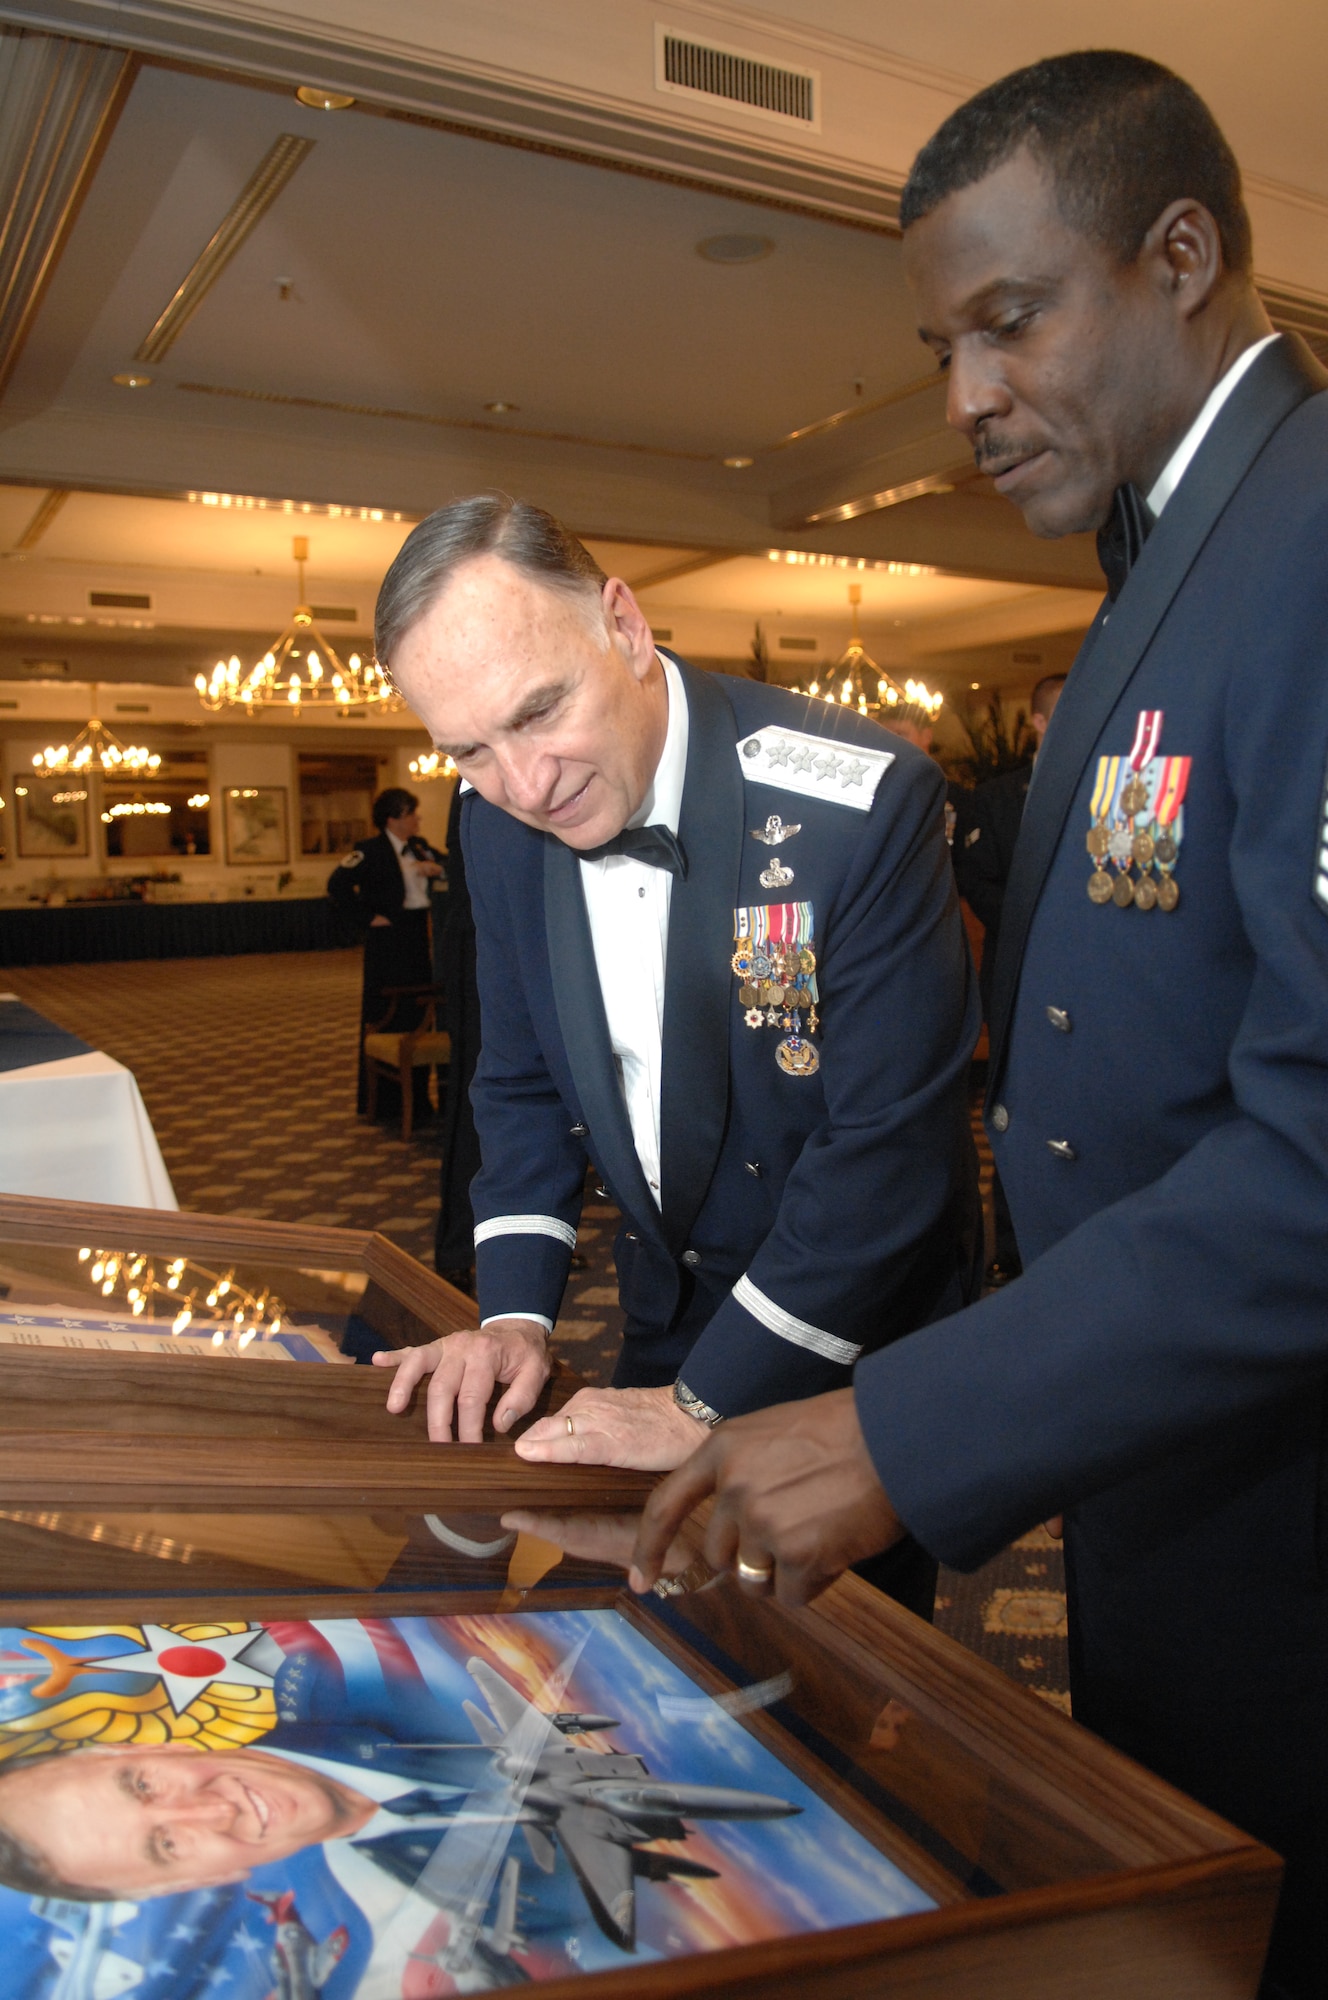 U.S. Air Forces in Europe Commander, General William T. Hobbins, admires the artwork he received during a USAFE order of the sword induction ceremony in his honor as USAFE’s top enlisted Airman, Chief Master Sgt. Gary G. Coleman, explains some of the detailing in the work.  The order of the sword induction is the highest honor the enlisted corps can bestow on an individual. (U.S. Air Force photo by Tech Sgt. Corey Clements)